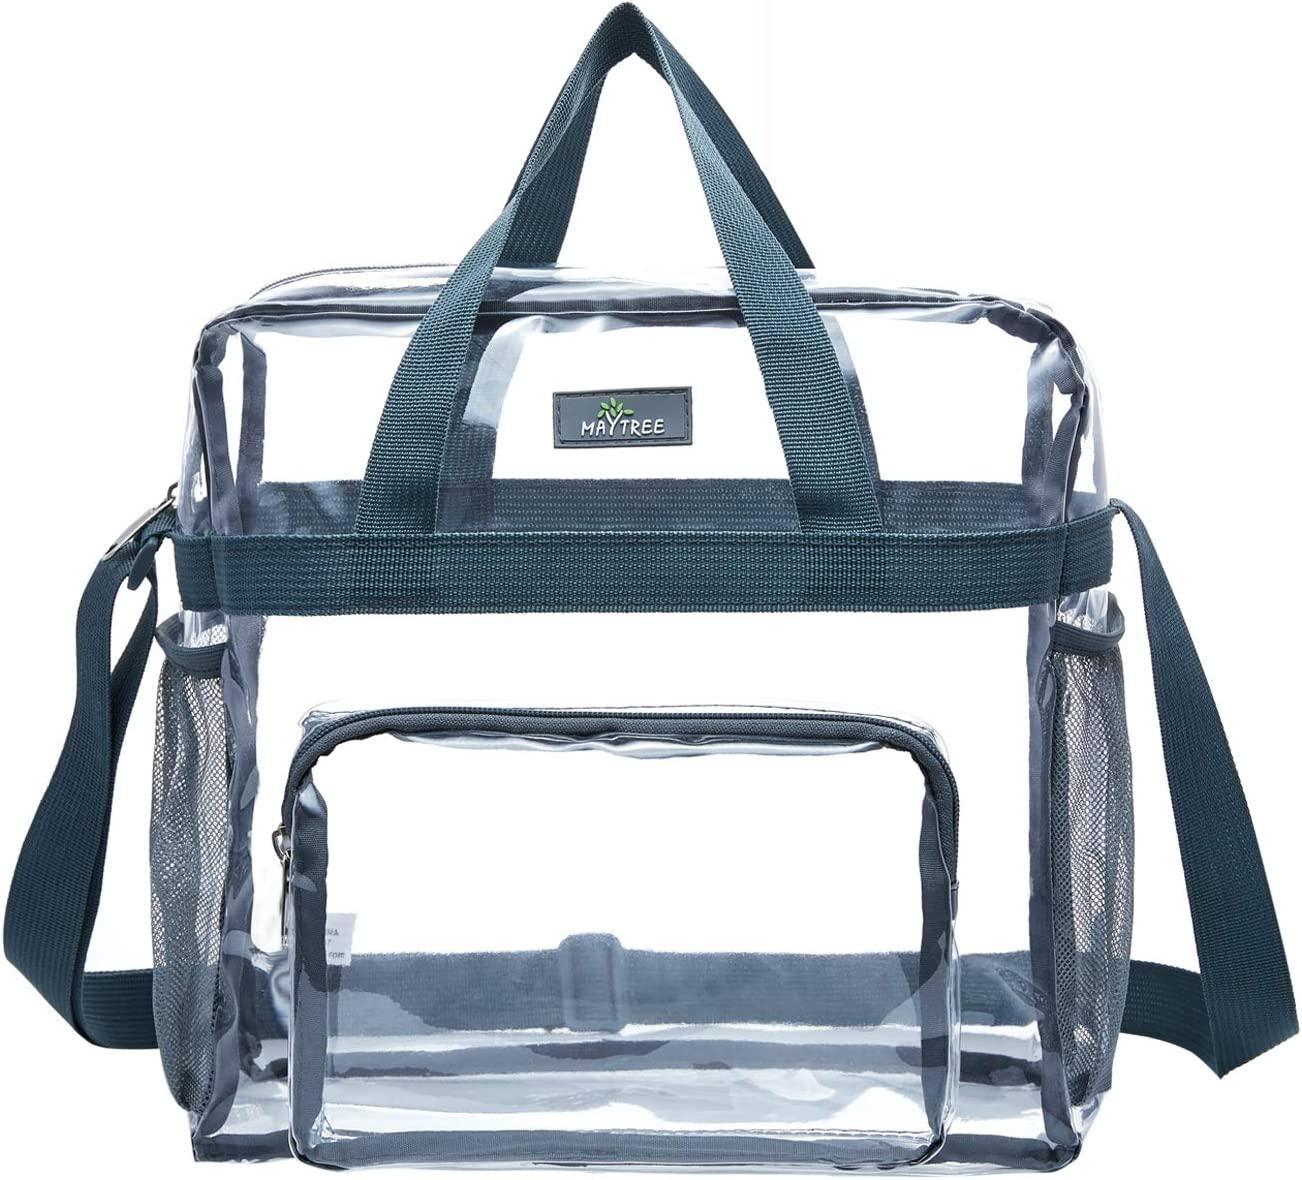 Chevy Bowtie Stadium Approved Clear Tote Bag